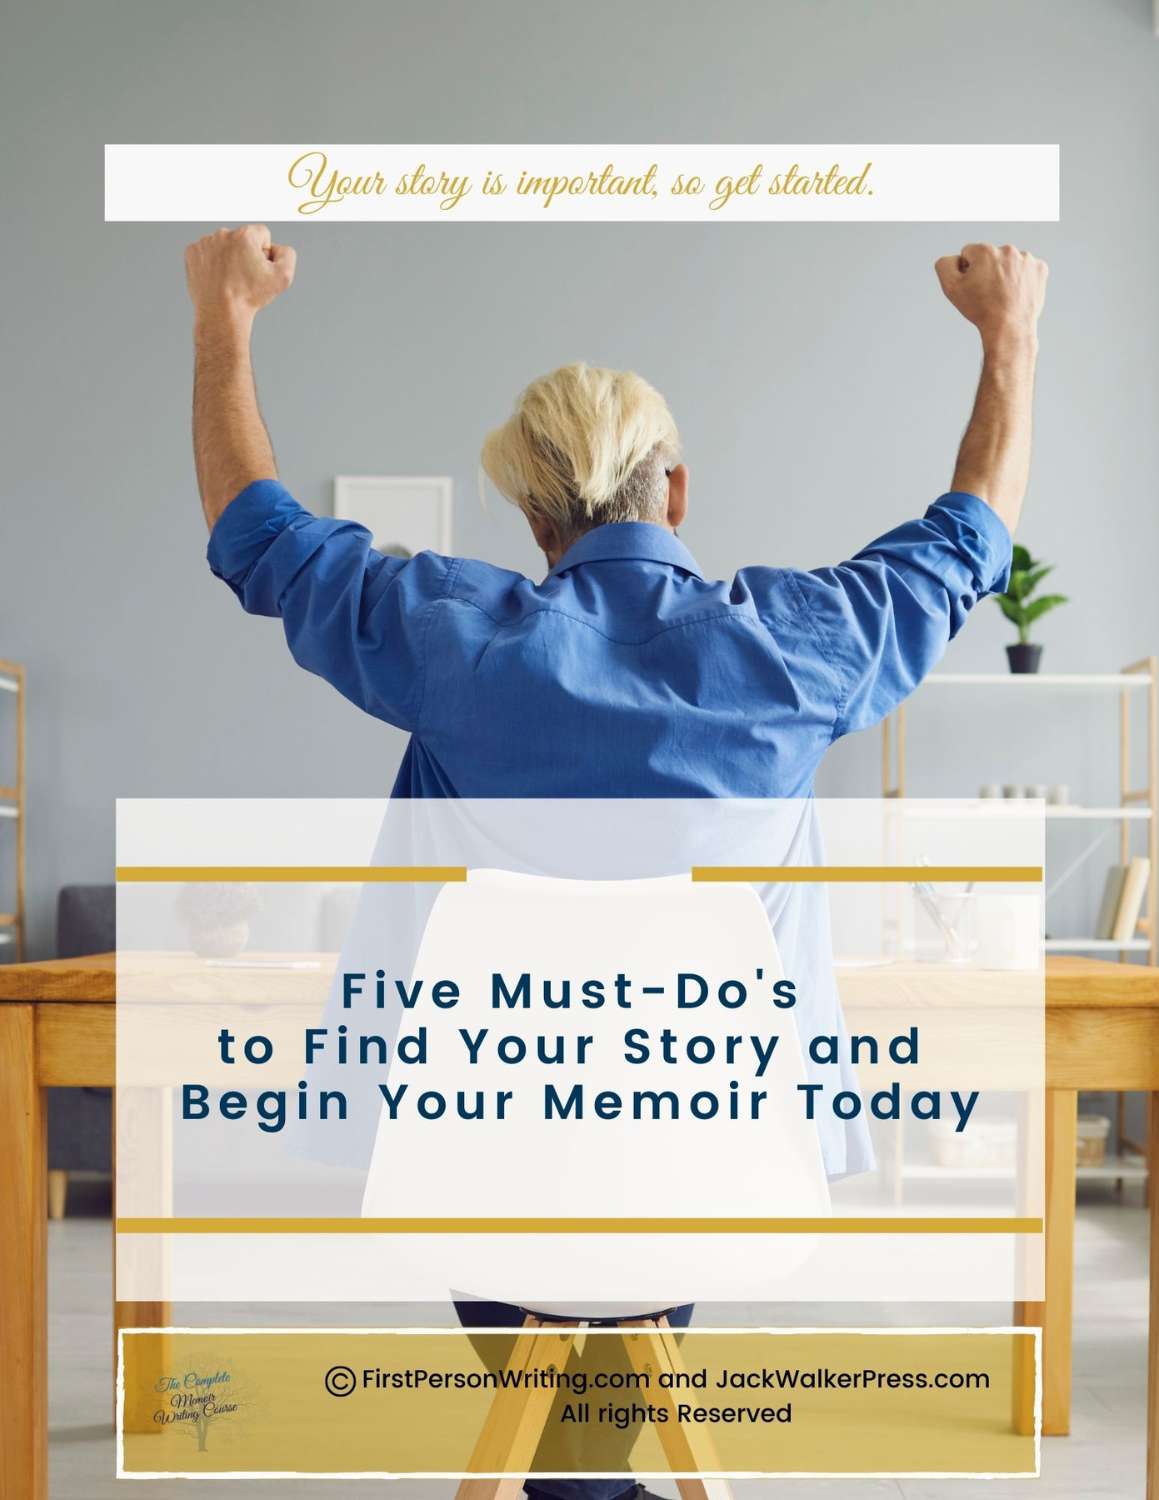 Find your story and begin your memoir